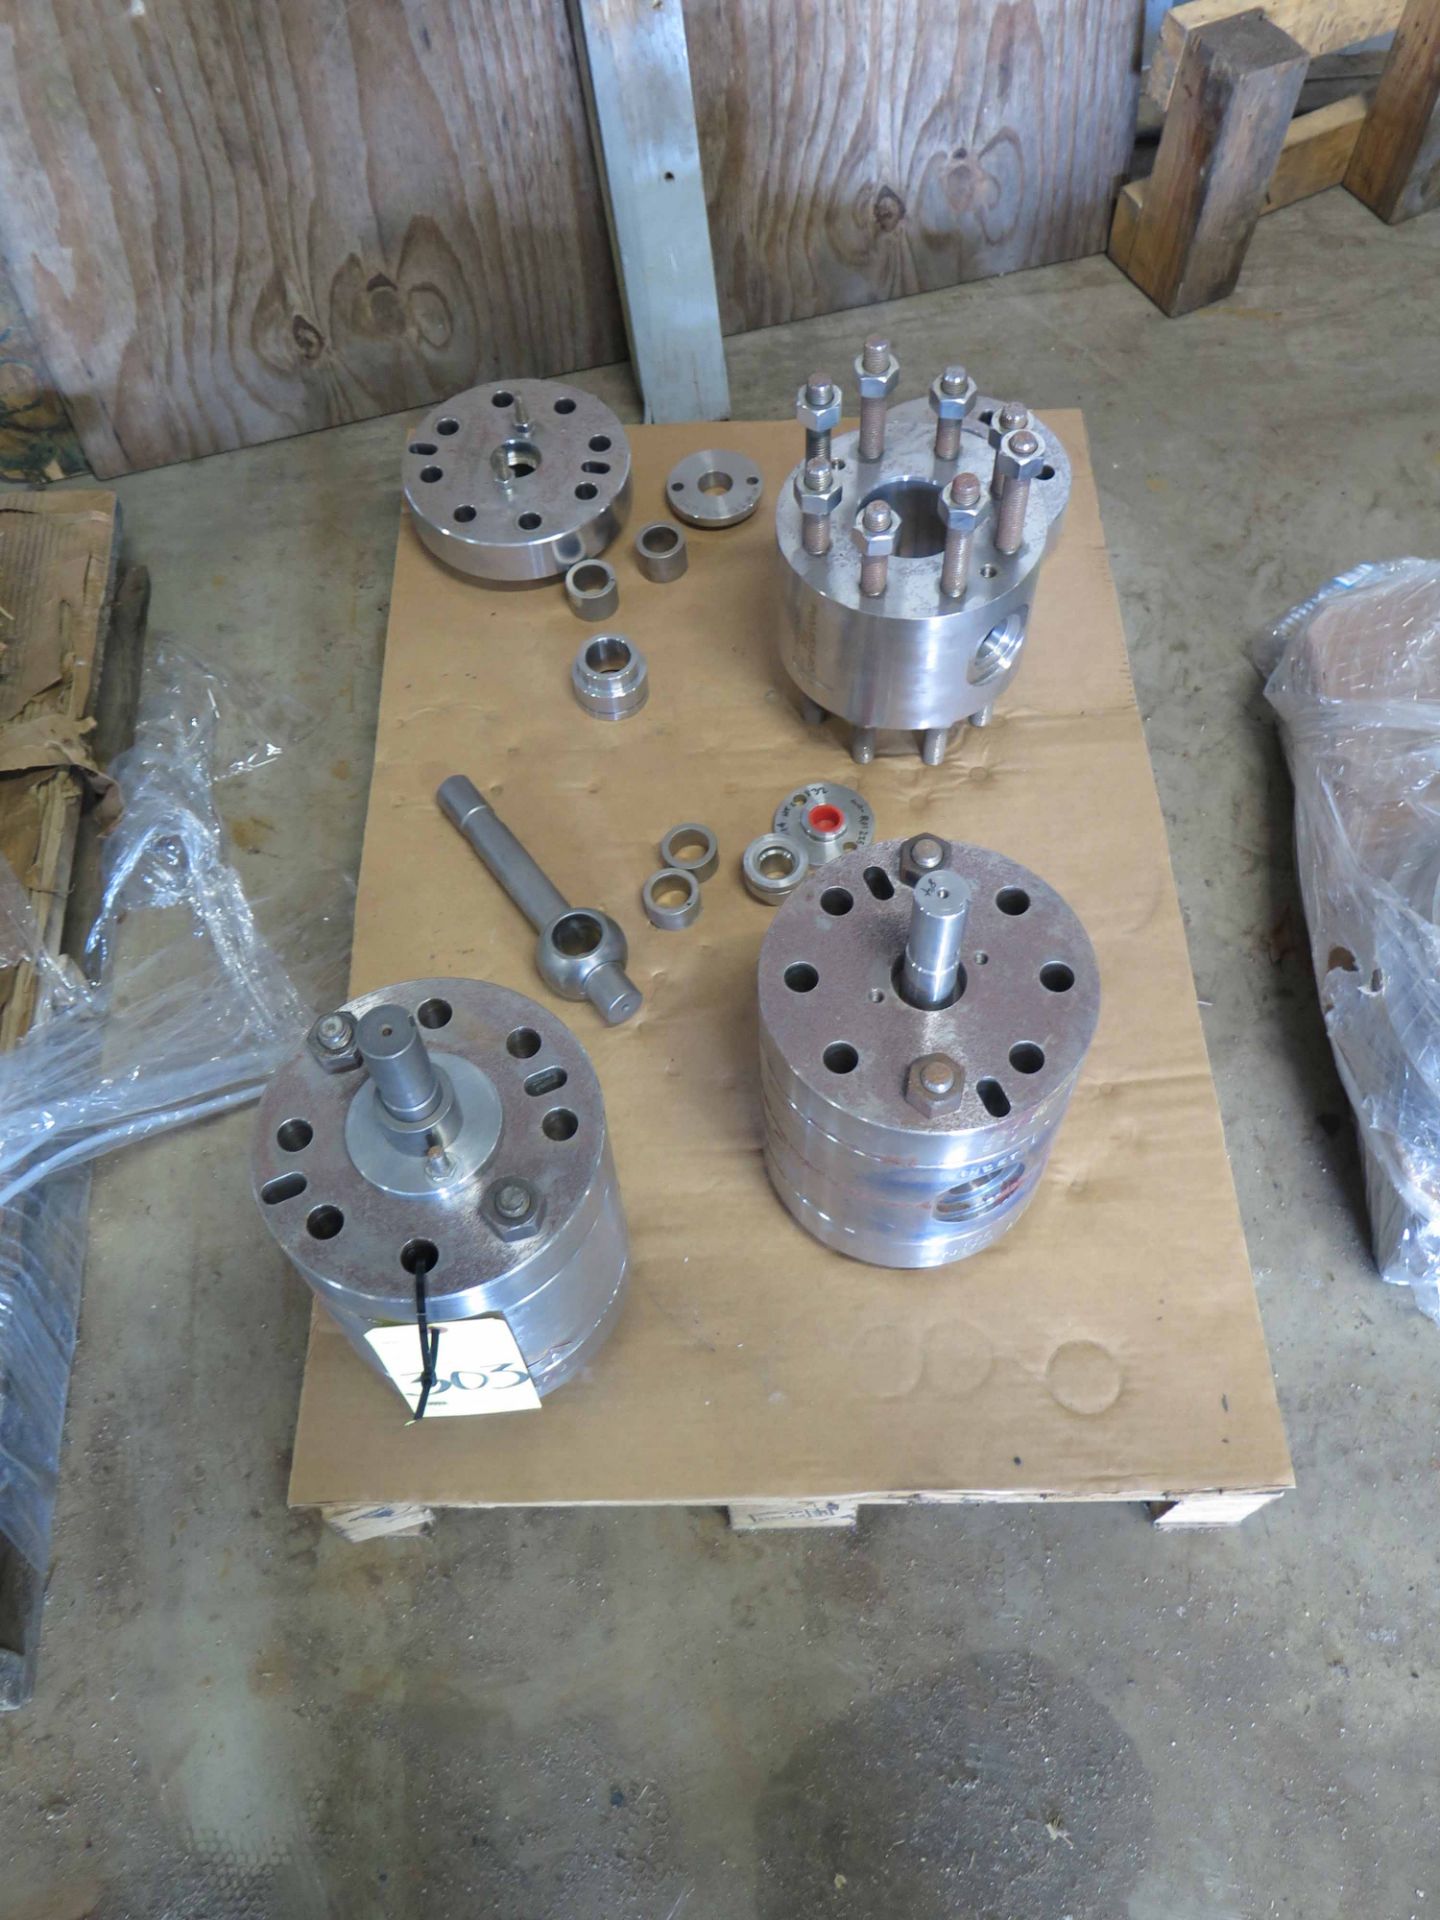 LOT OF BALL VALVE PARTS, 3-1/2" (on one pallet)